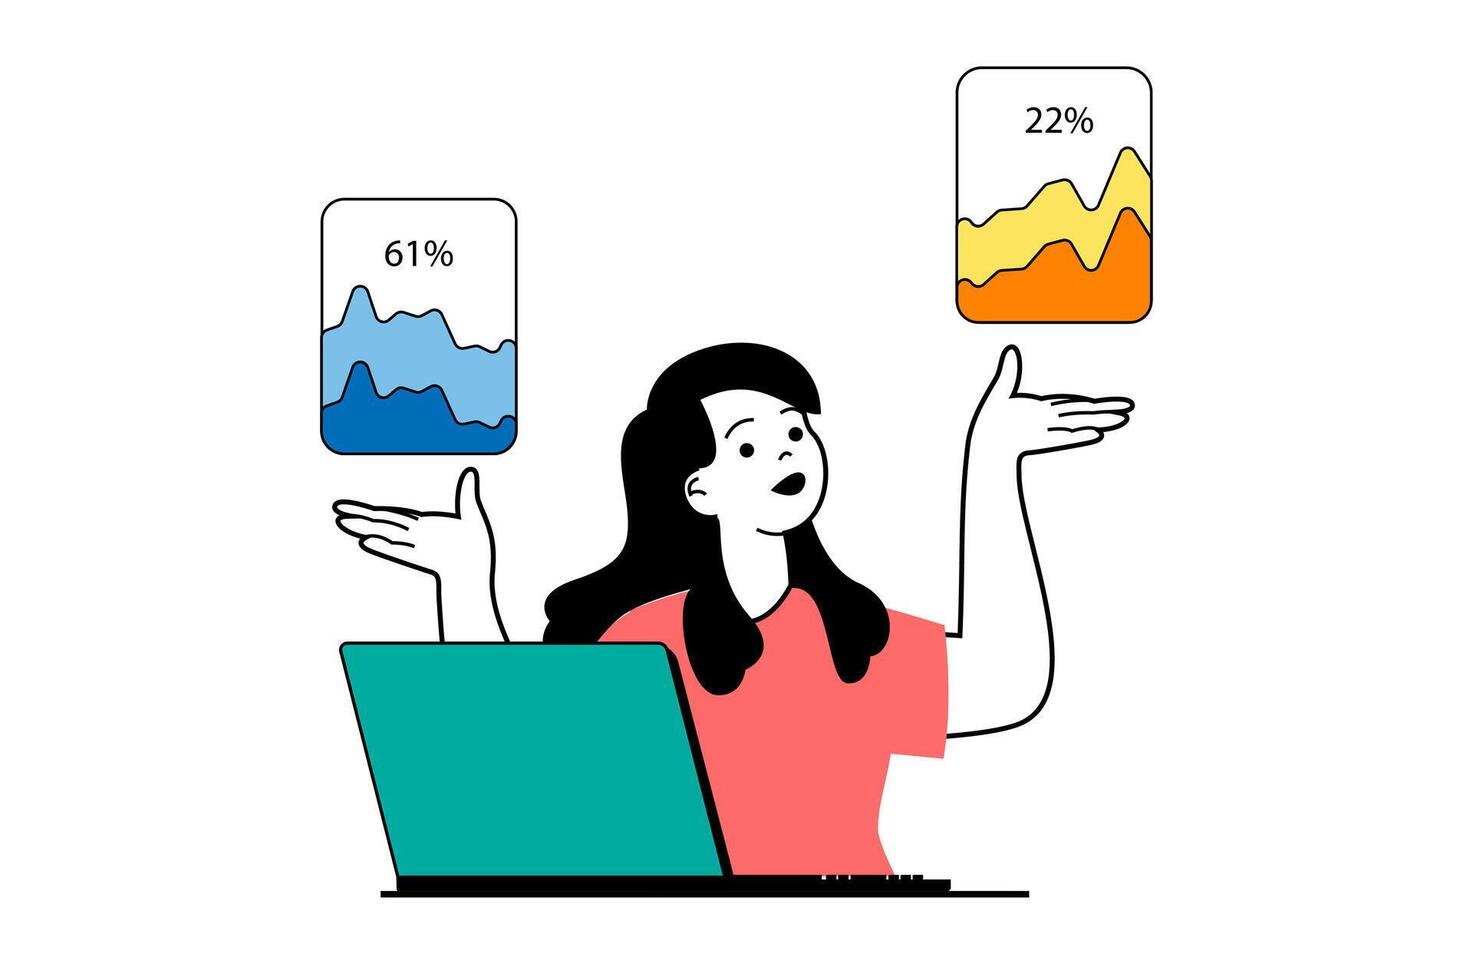 Digital business concept with people scene in flat web design. Woman compares sales performance of company and analyzing statistics. Vector illustration for social media banner, marketing material.